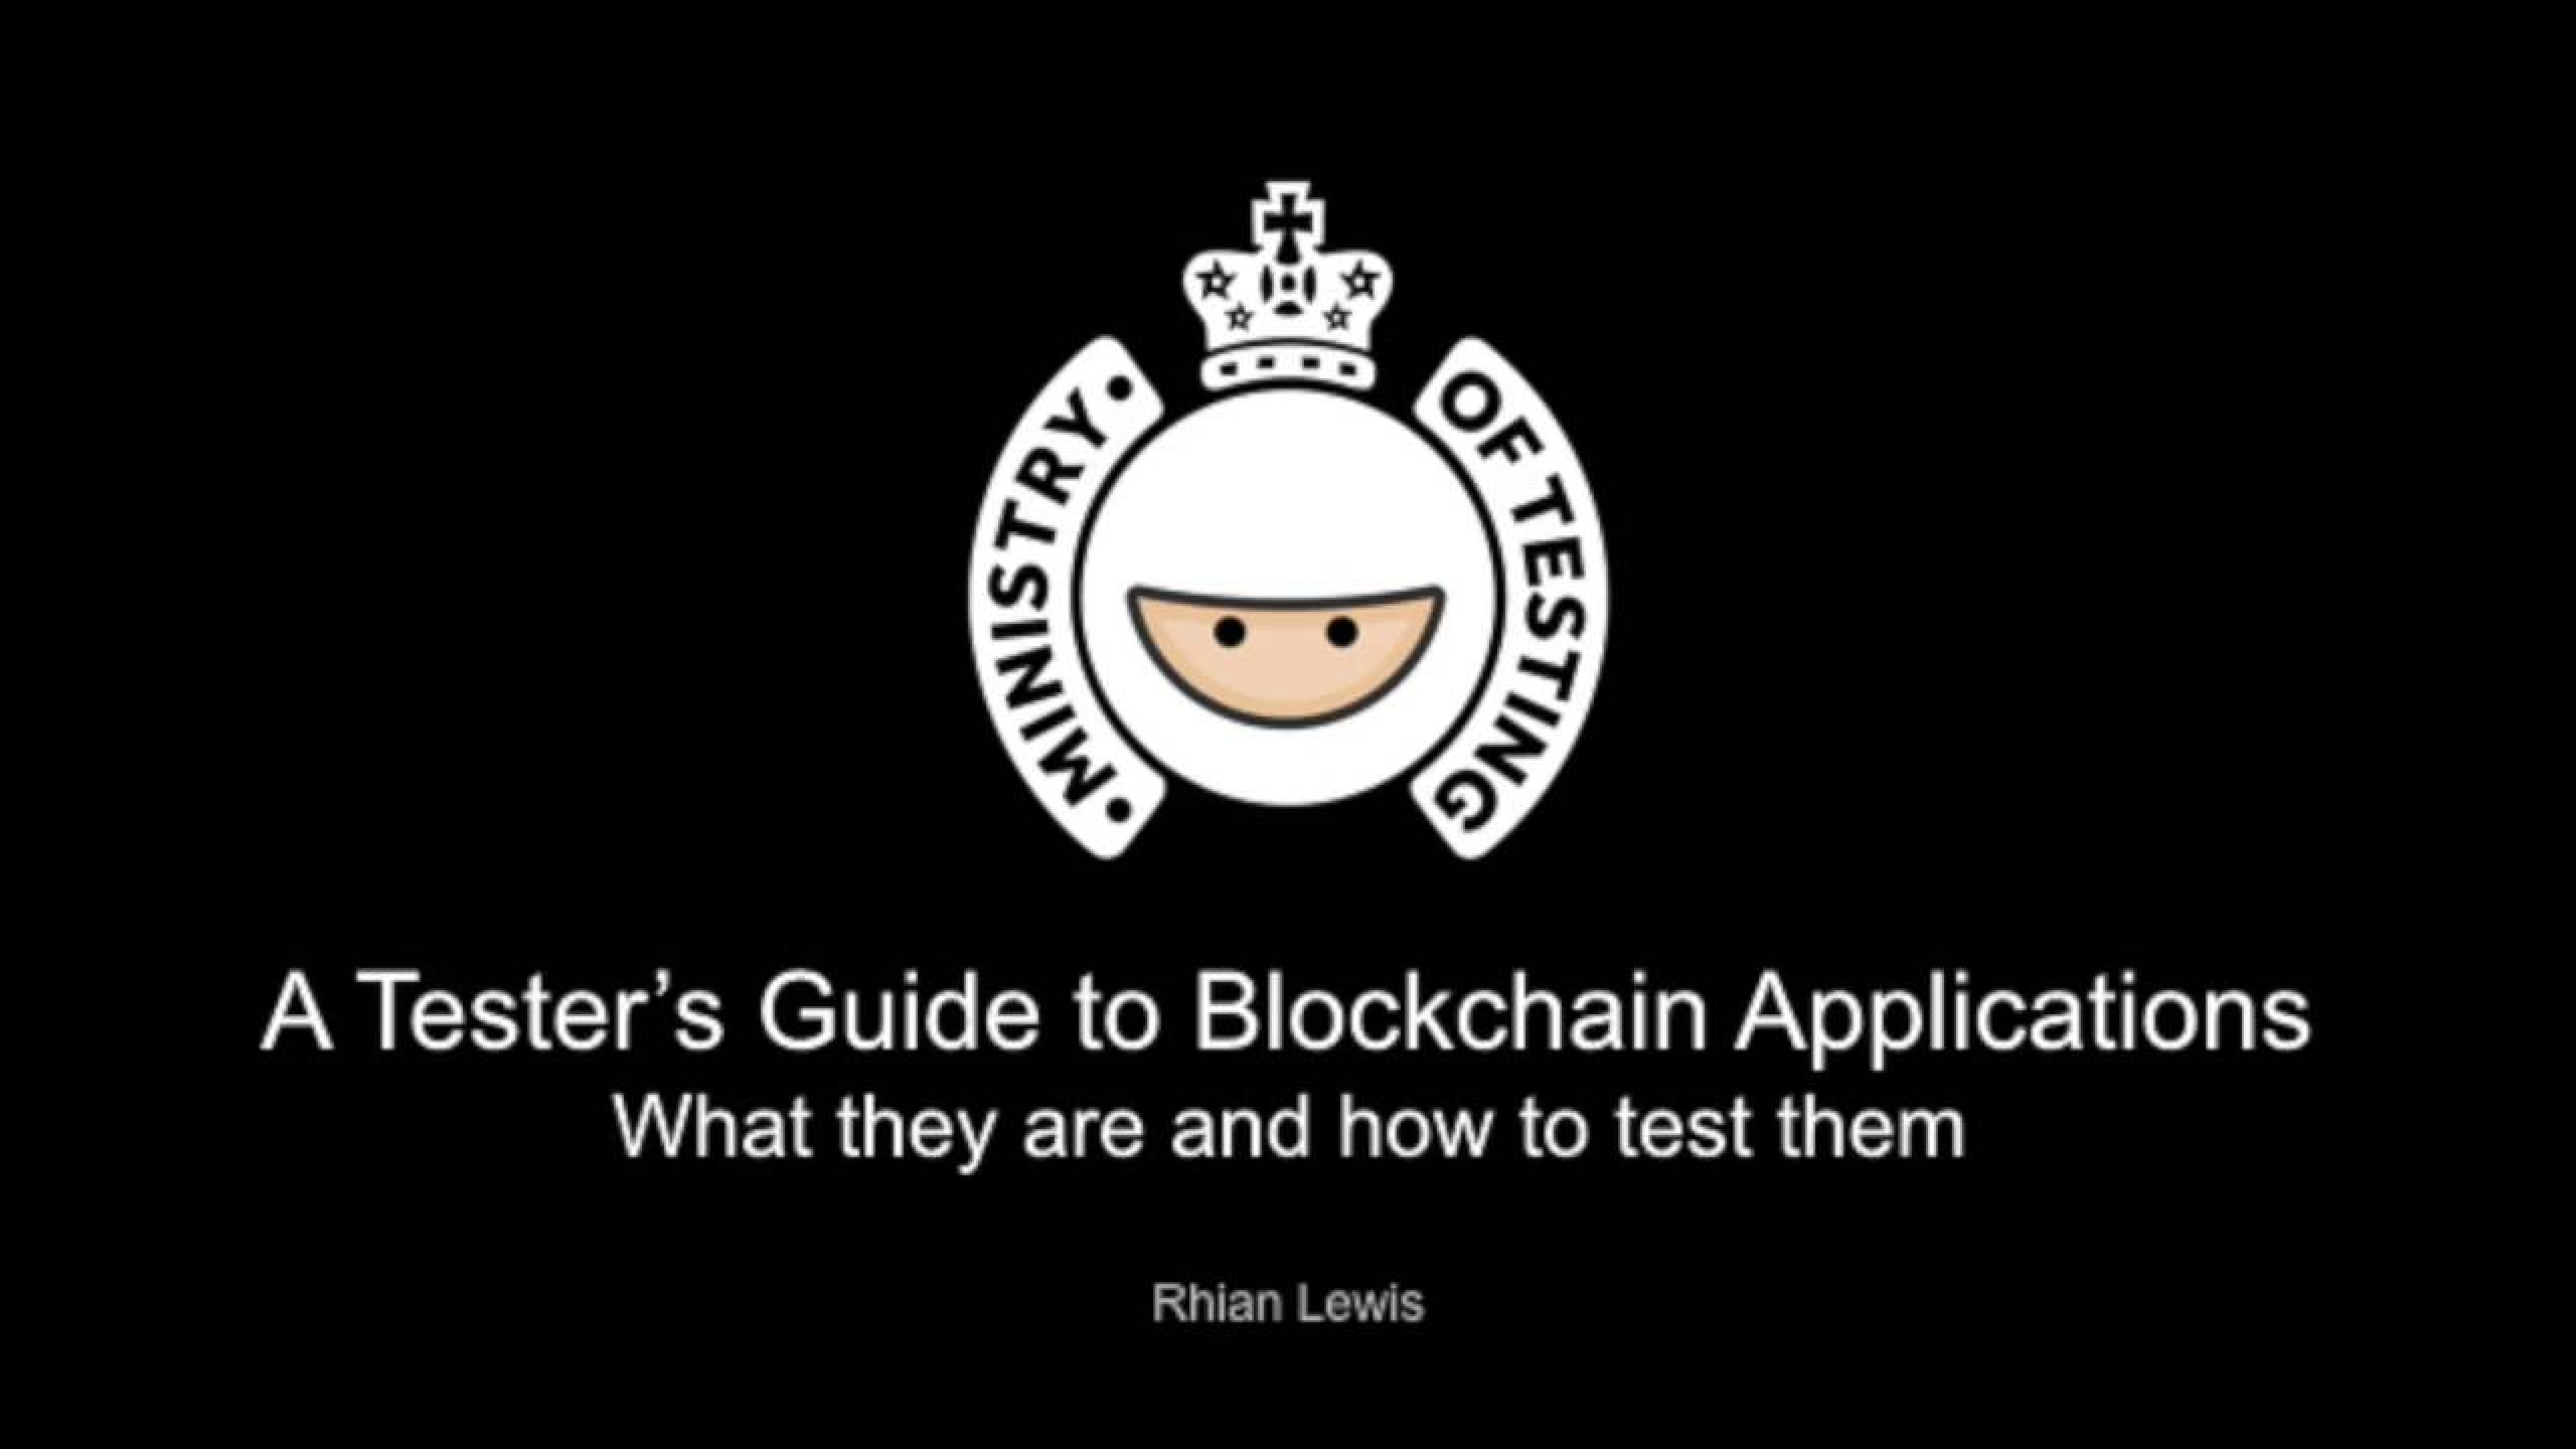 A Tester's Guide to Blockchain Applications with Rhian Lewis